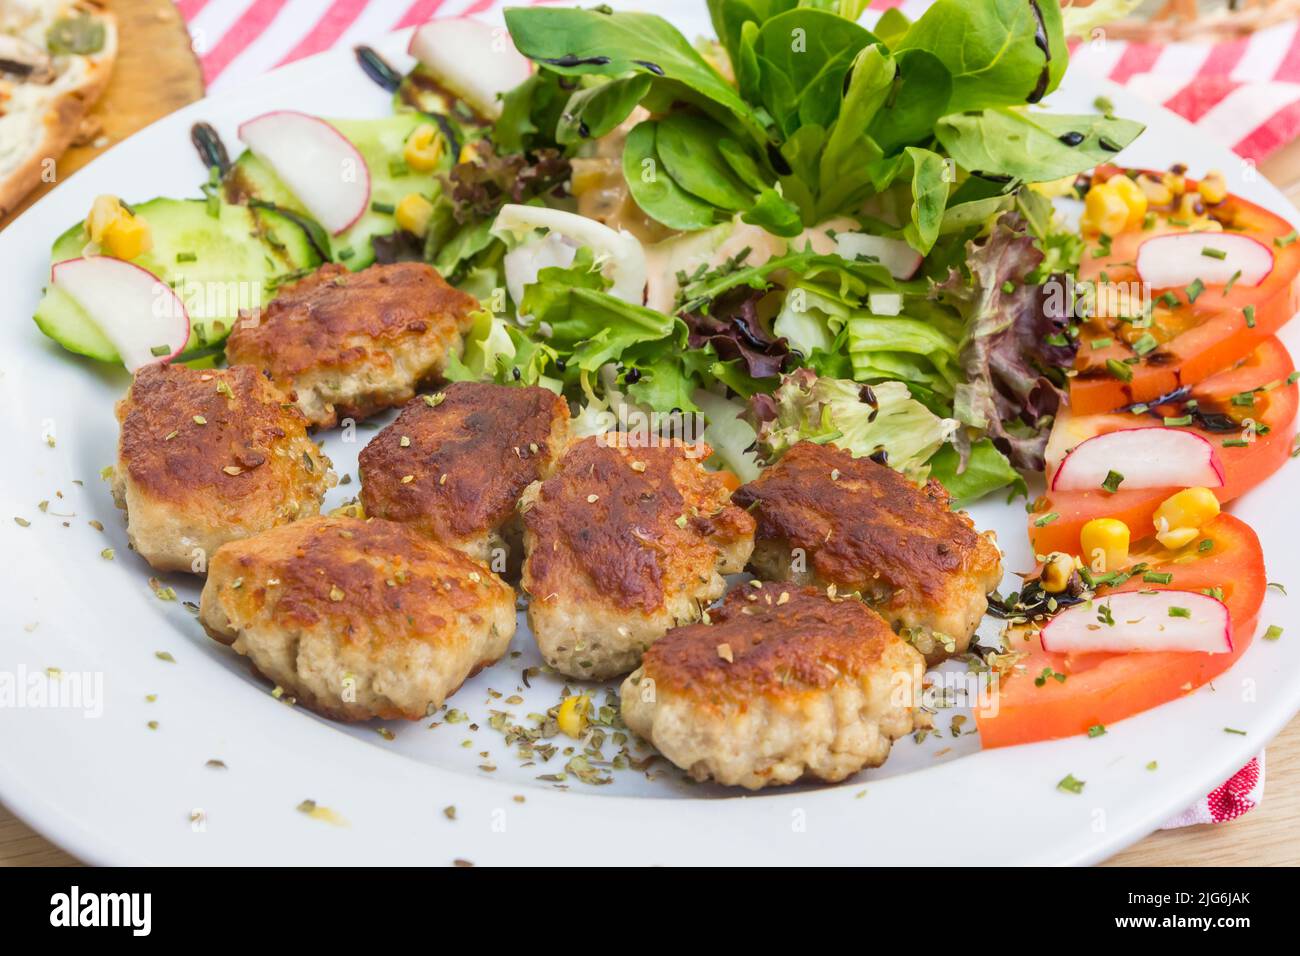 Traditional german small meatballs (frikadelle) served with salad and tomato on a white plate Stock Photo